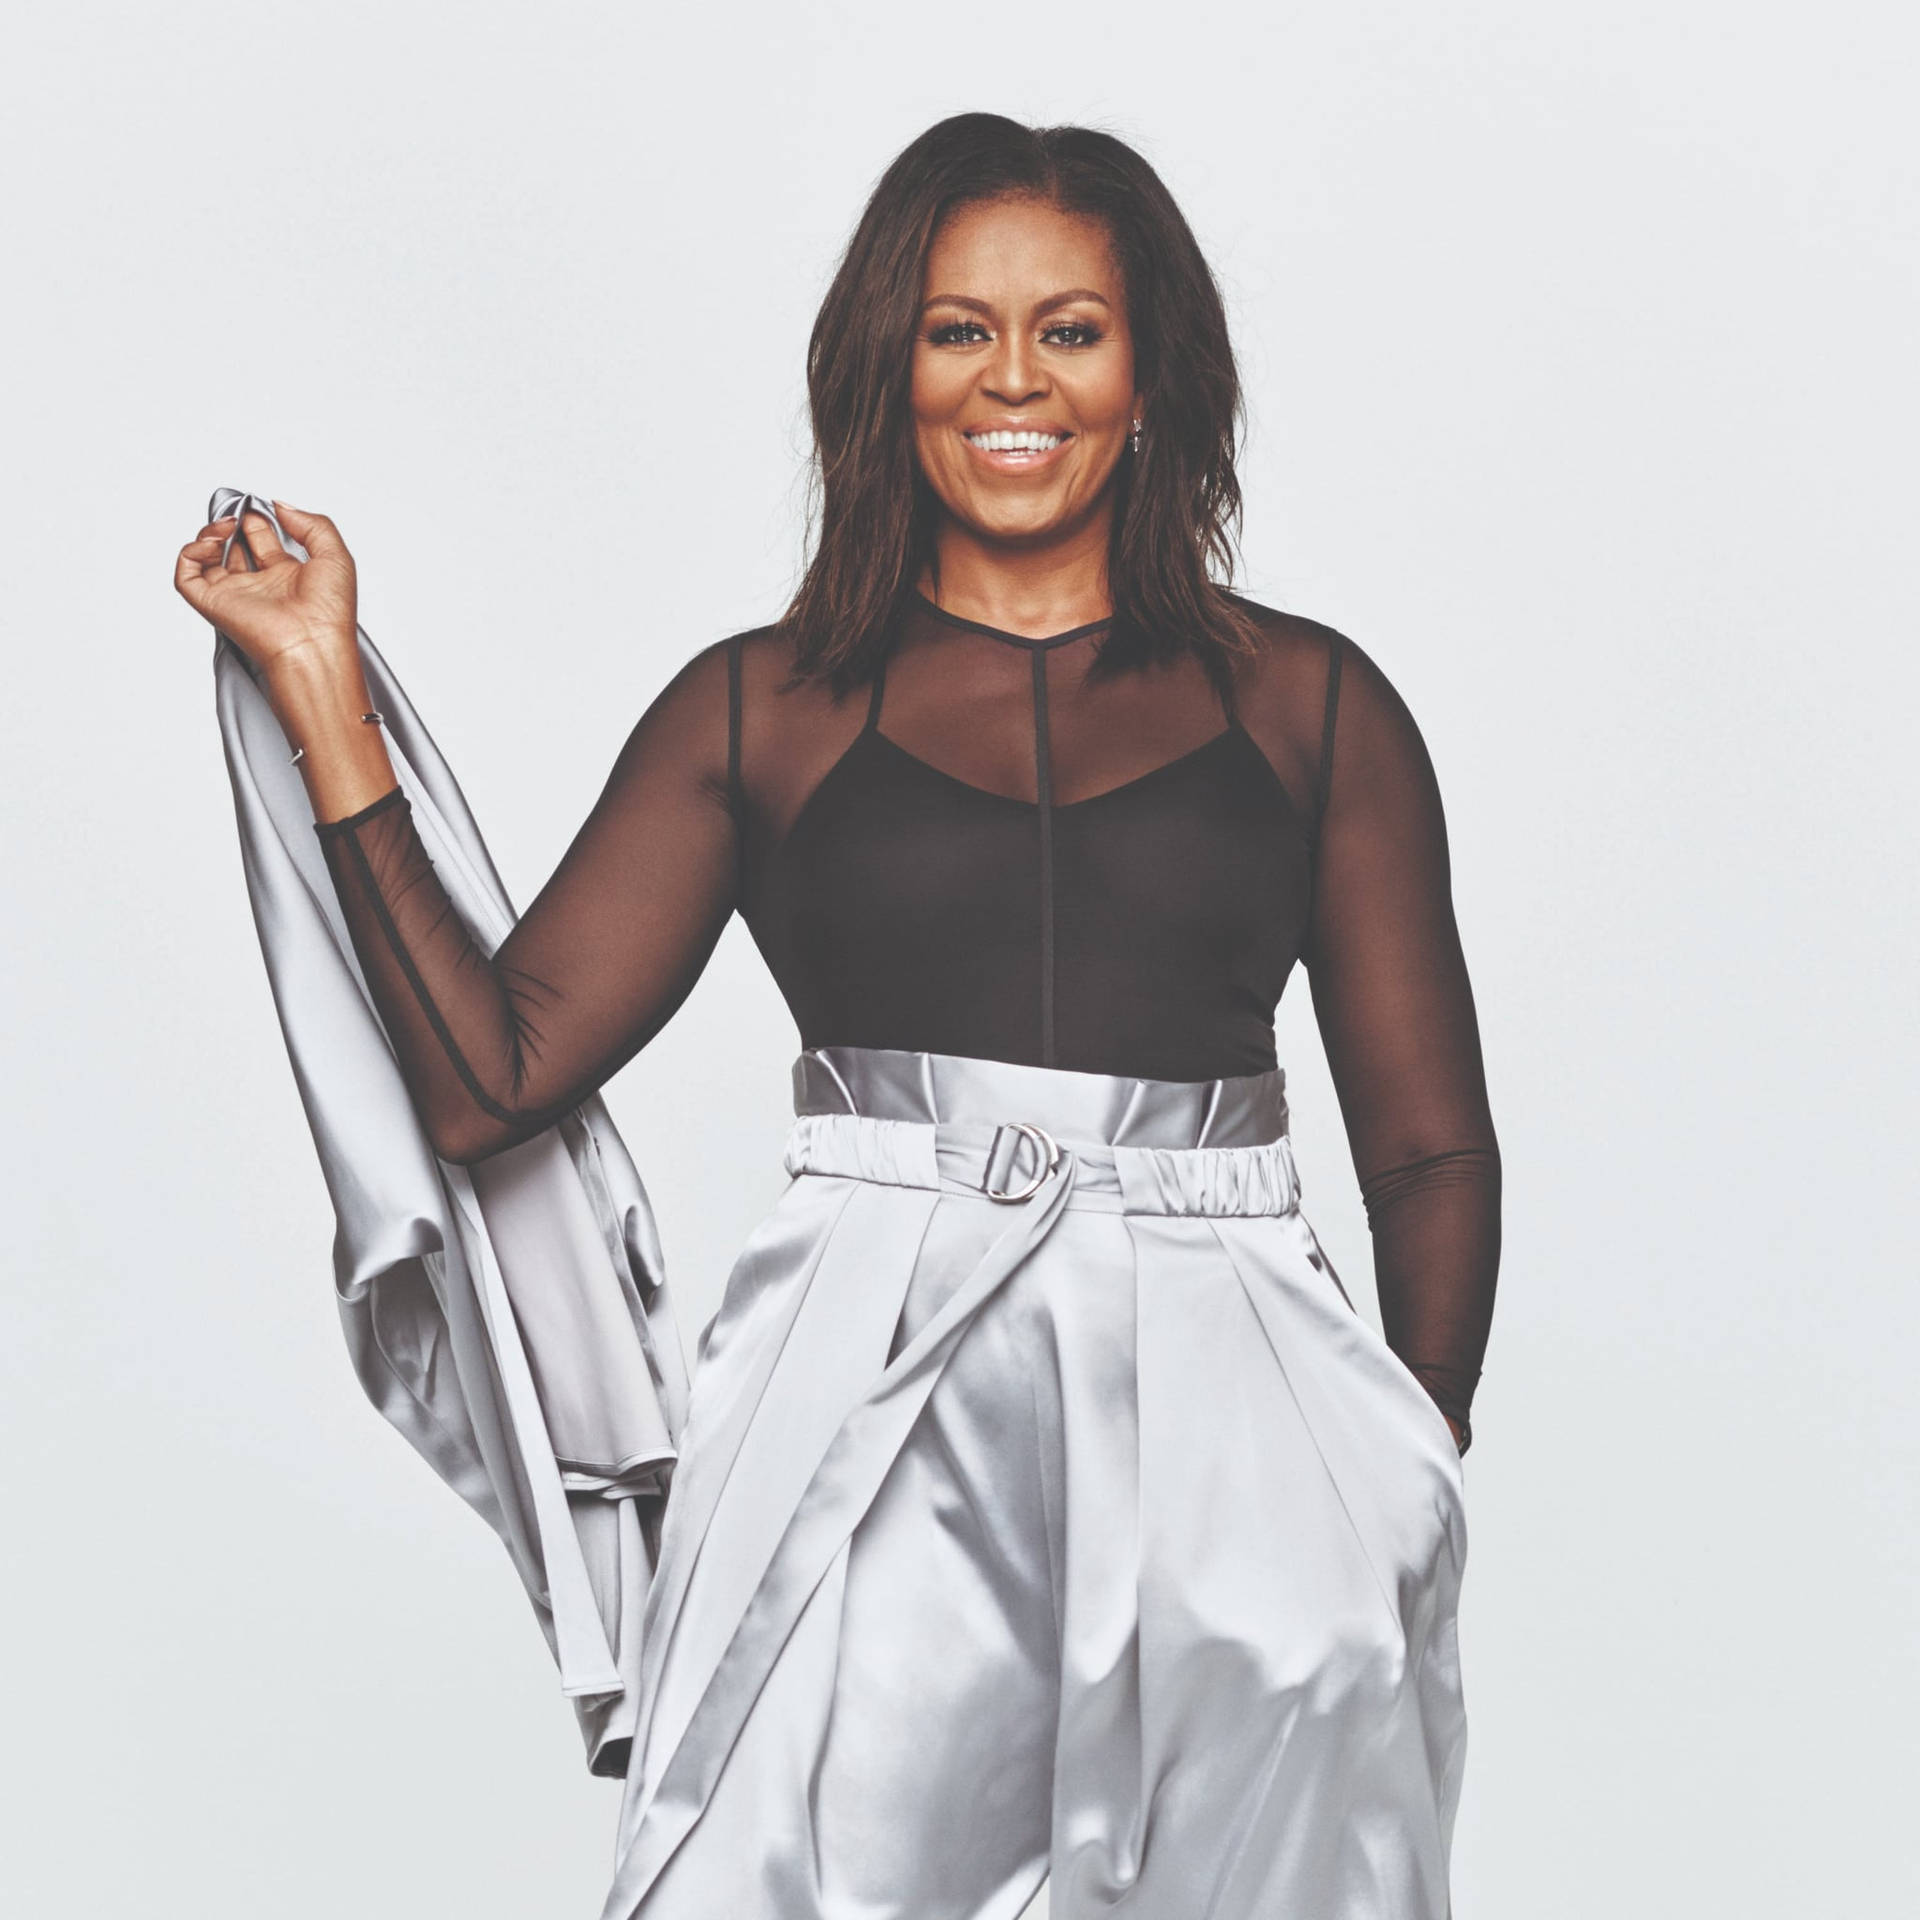 Michelle Obama In Sheer Top Background